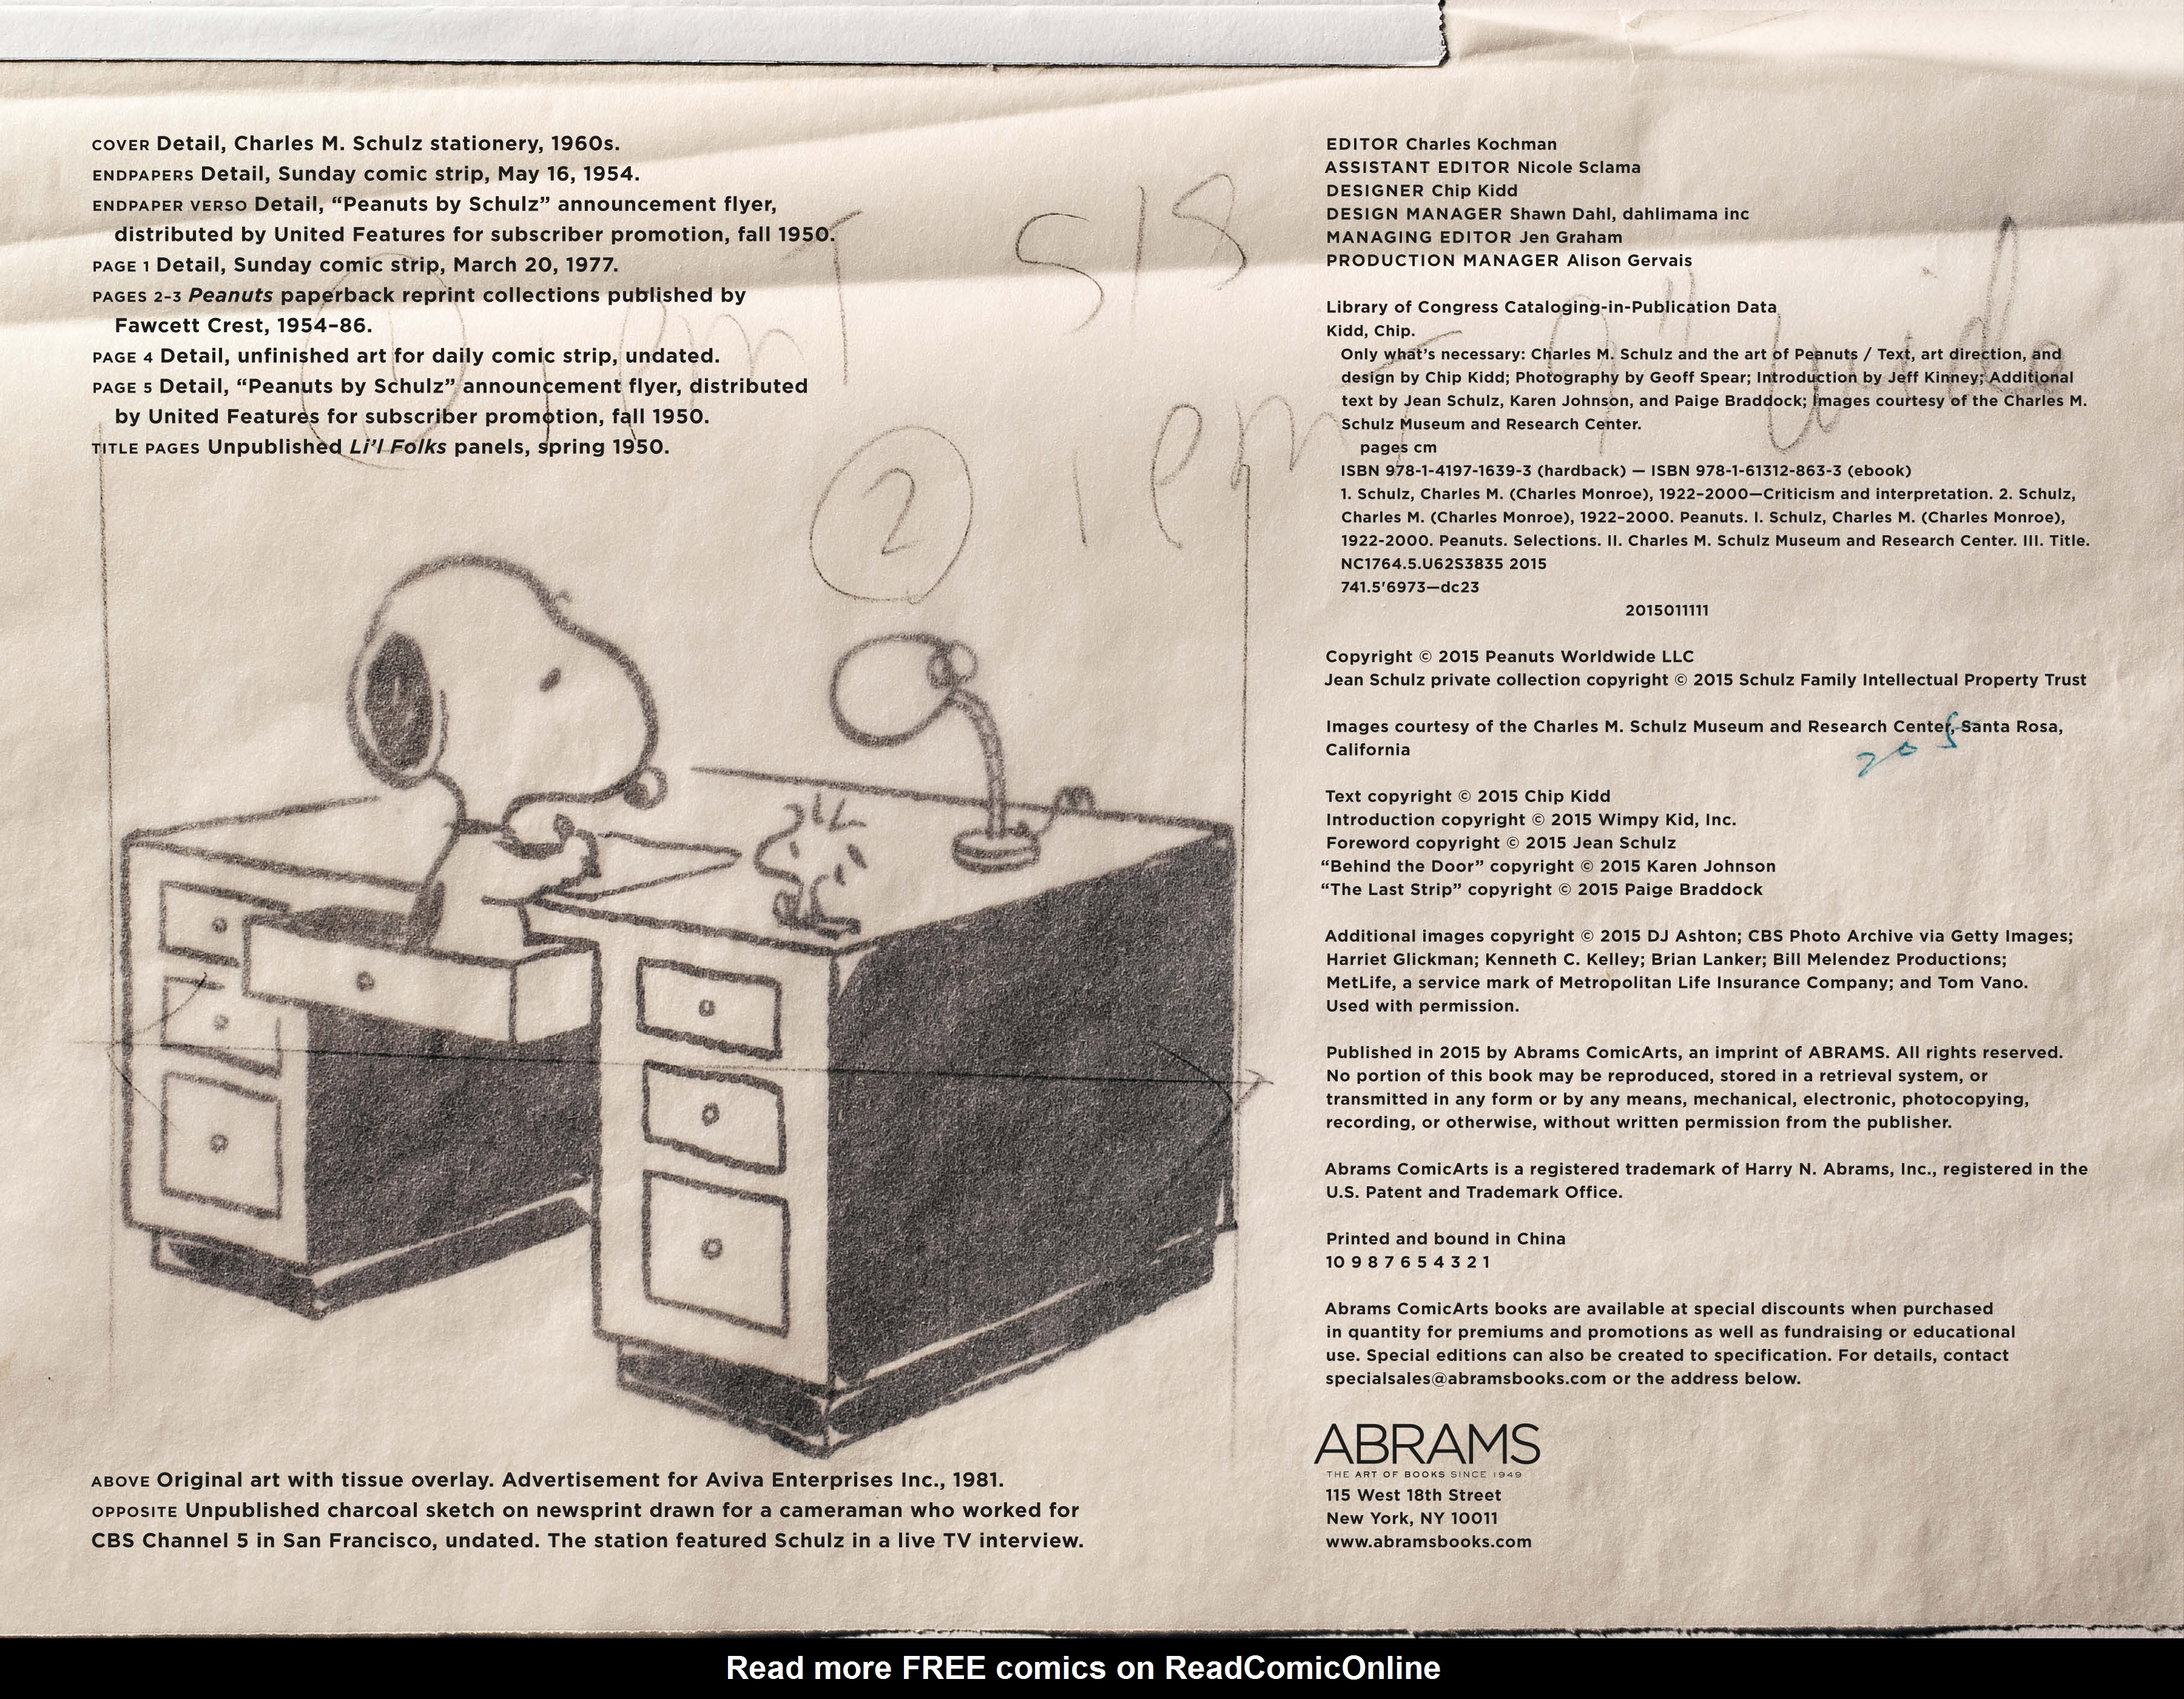 Read online Only What's Necessary: Charles M. Schulz and the Art of Peanuts comic -  Issue # TPB (Part 1) - 10